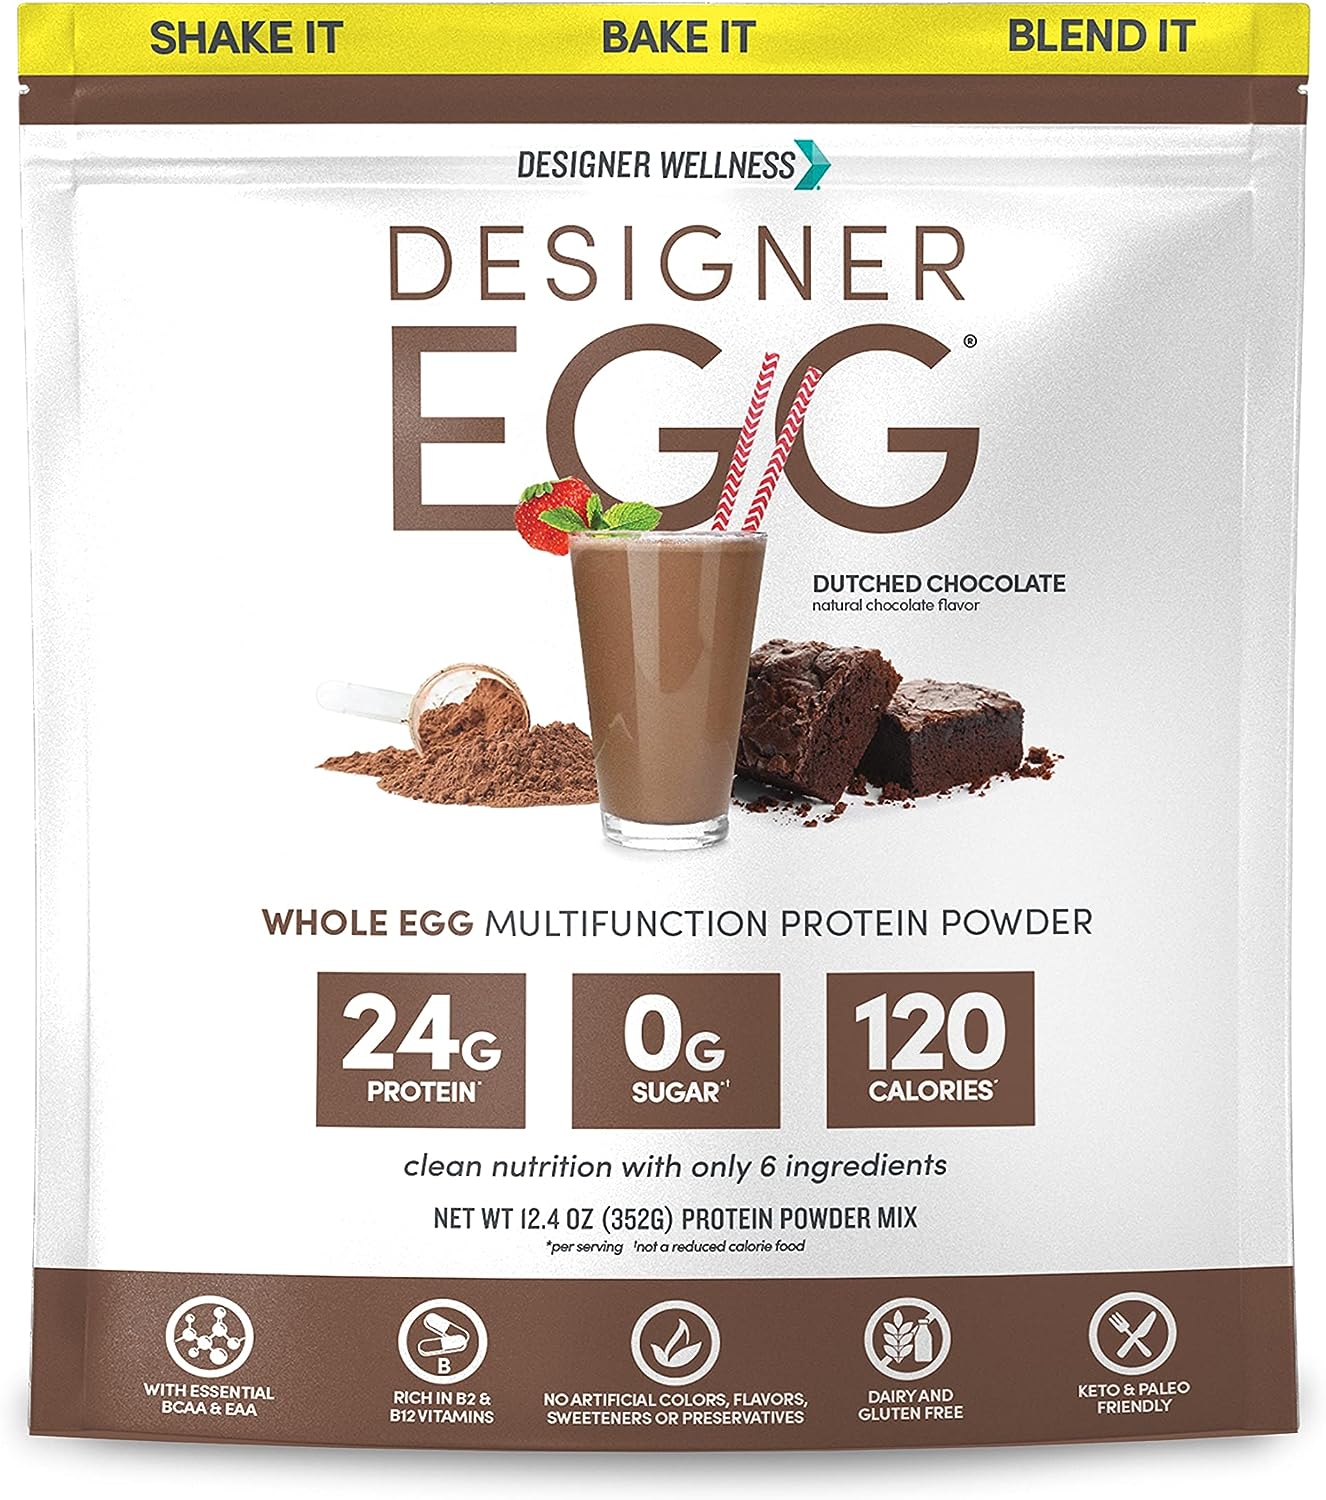 Designer Wellness, Designer Egg, Natural Egg Yolk & Egg White Protein Powder, Keto and Paleo Friendly, Low Calorie, Less Fat and Cholesterol, Dutch Chocolate, 12.4 Ounce